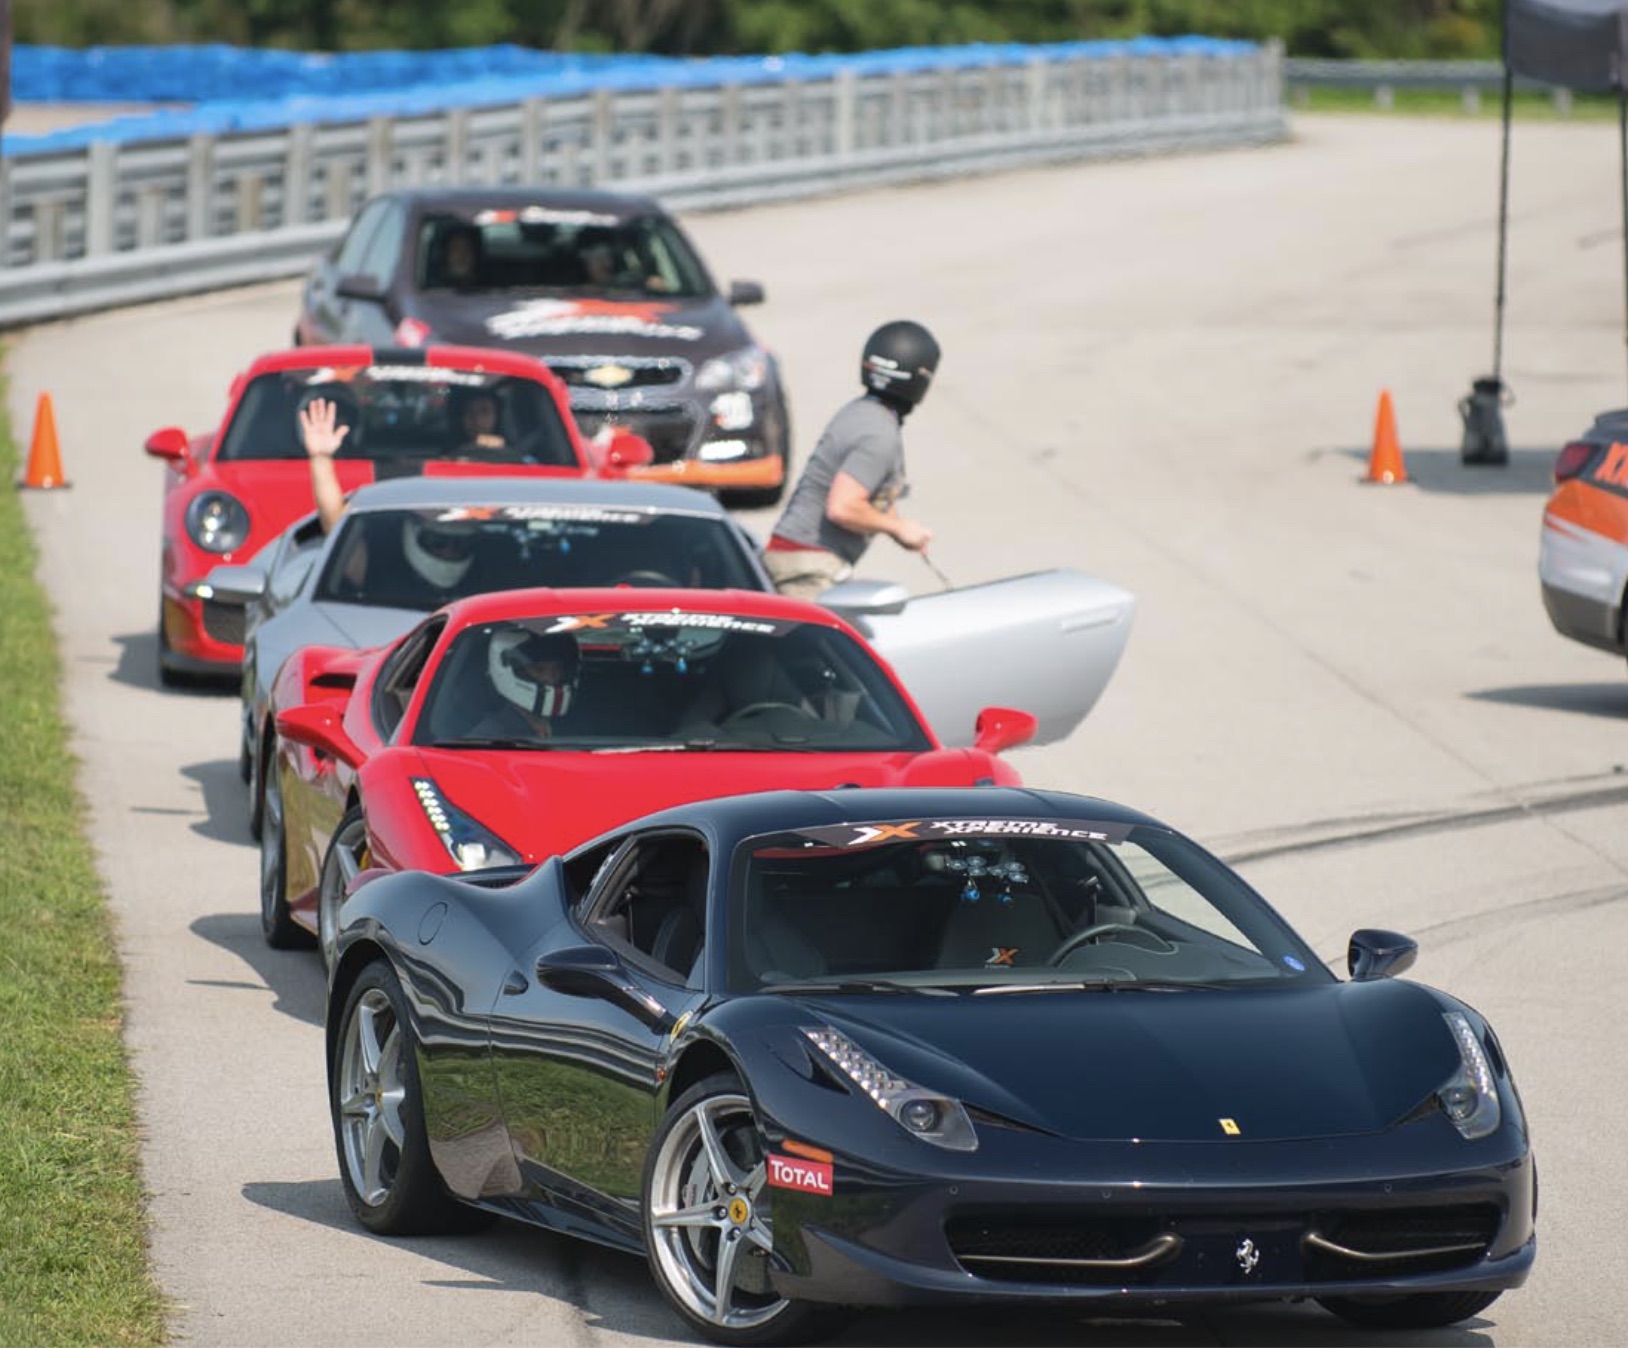 black and red race cars on lined up on a race track